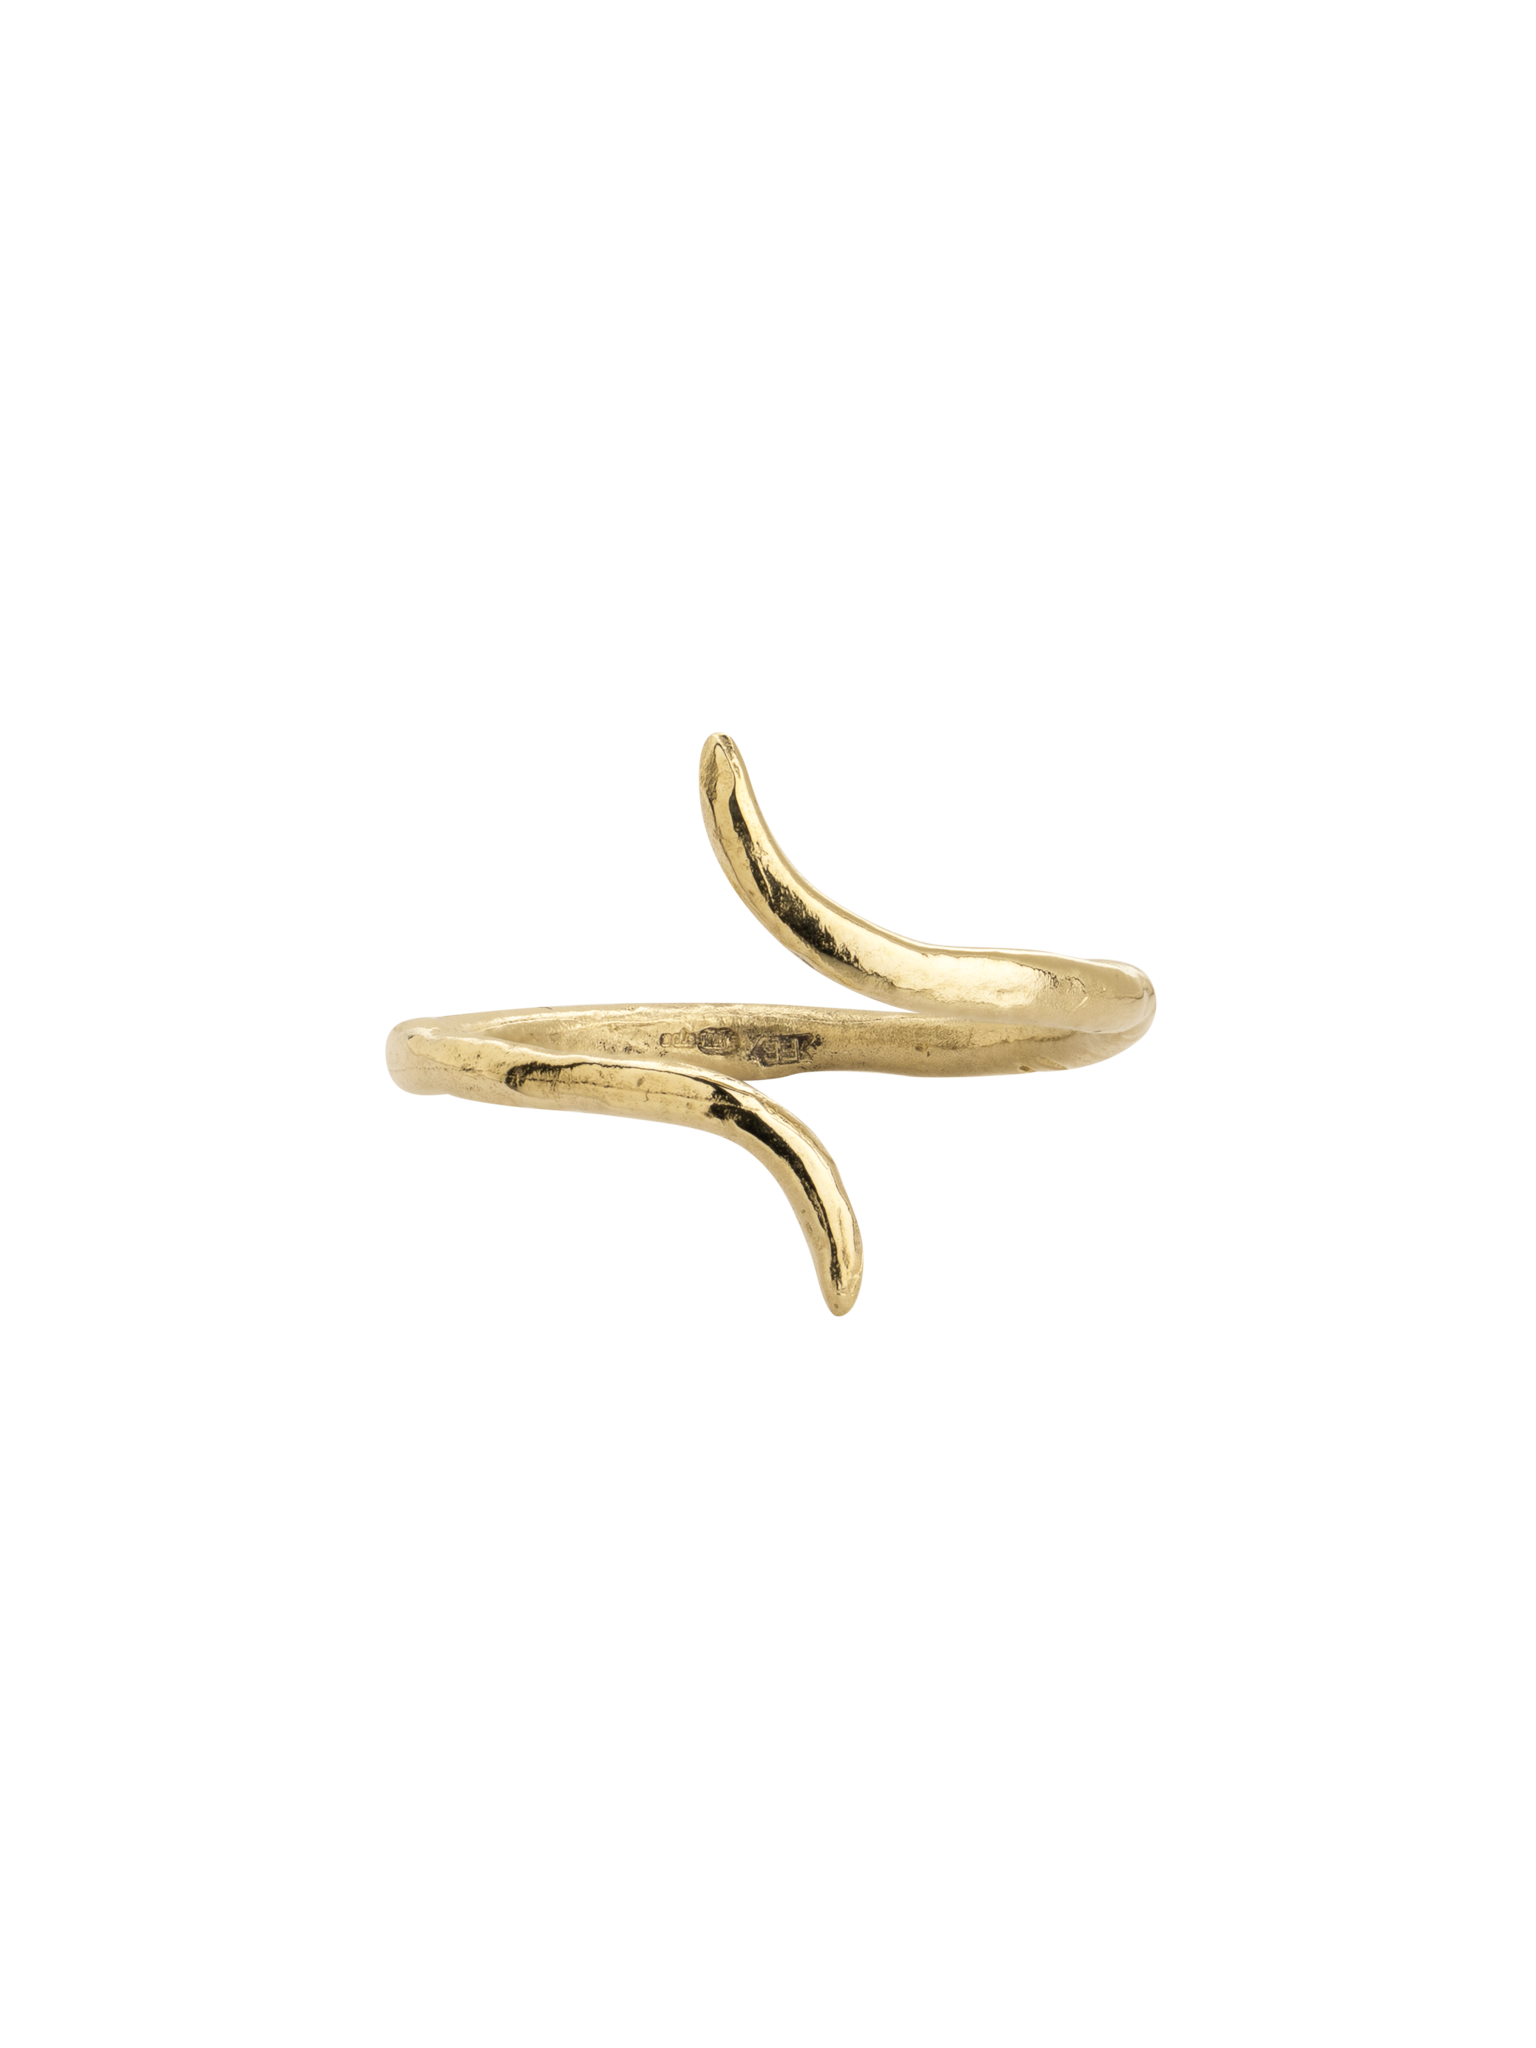 9ct Gold split eclipse open ring